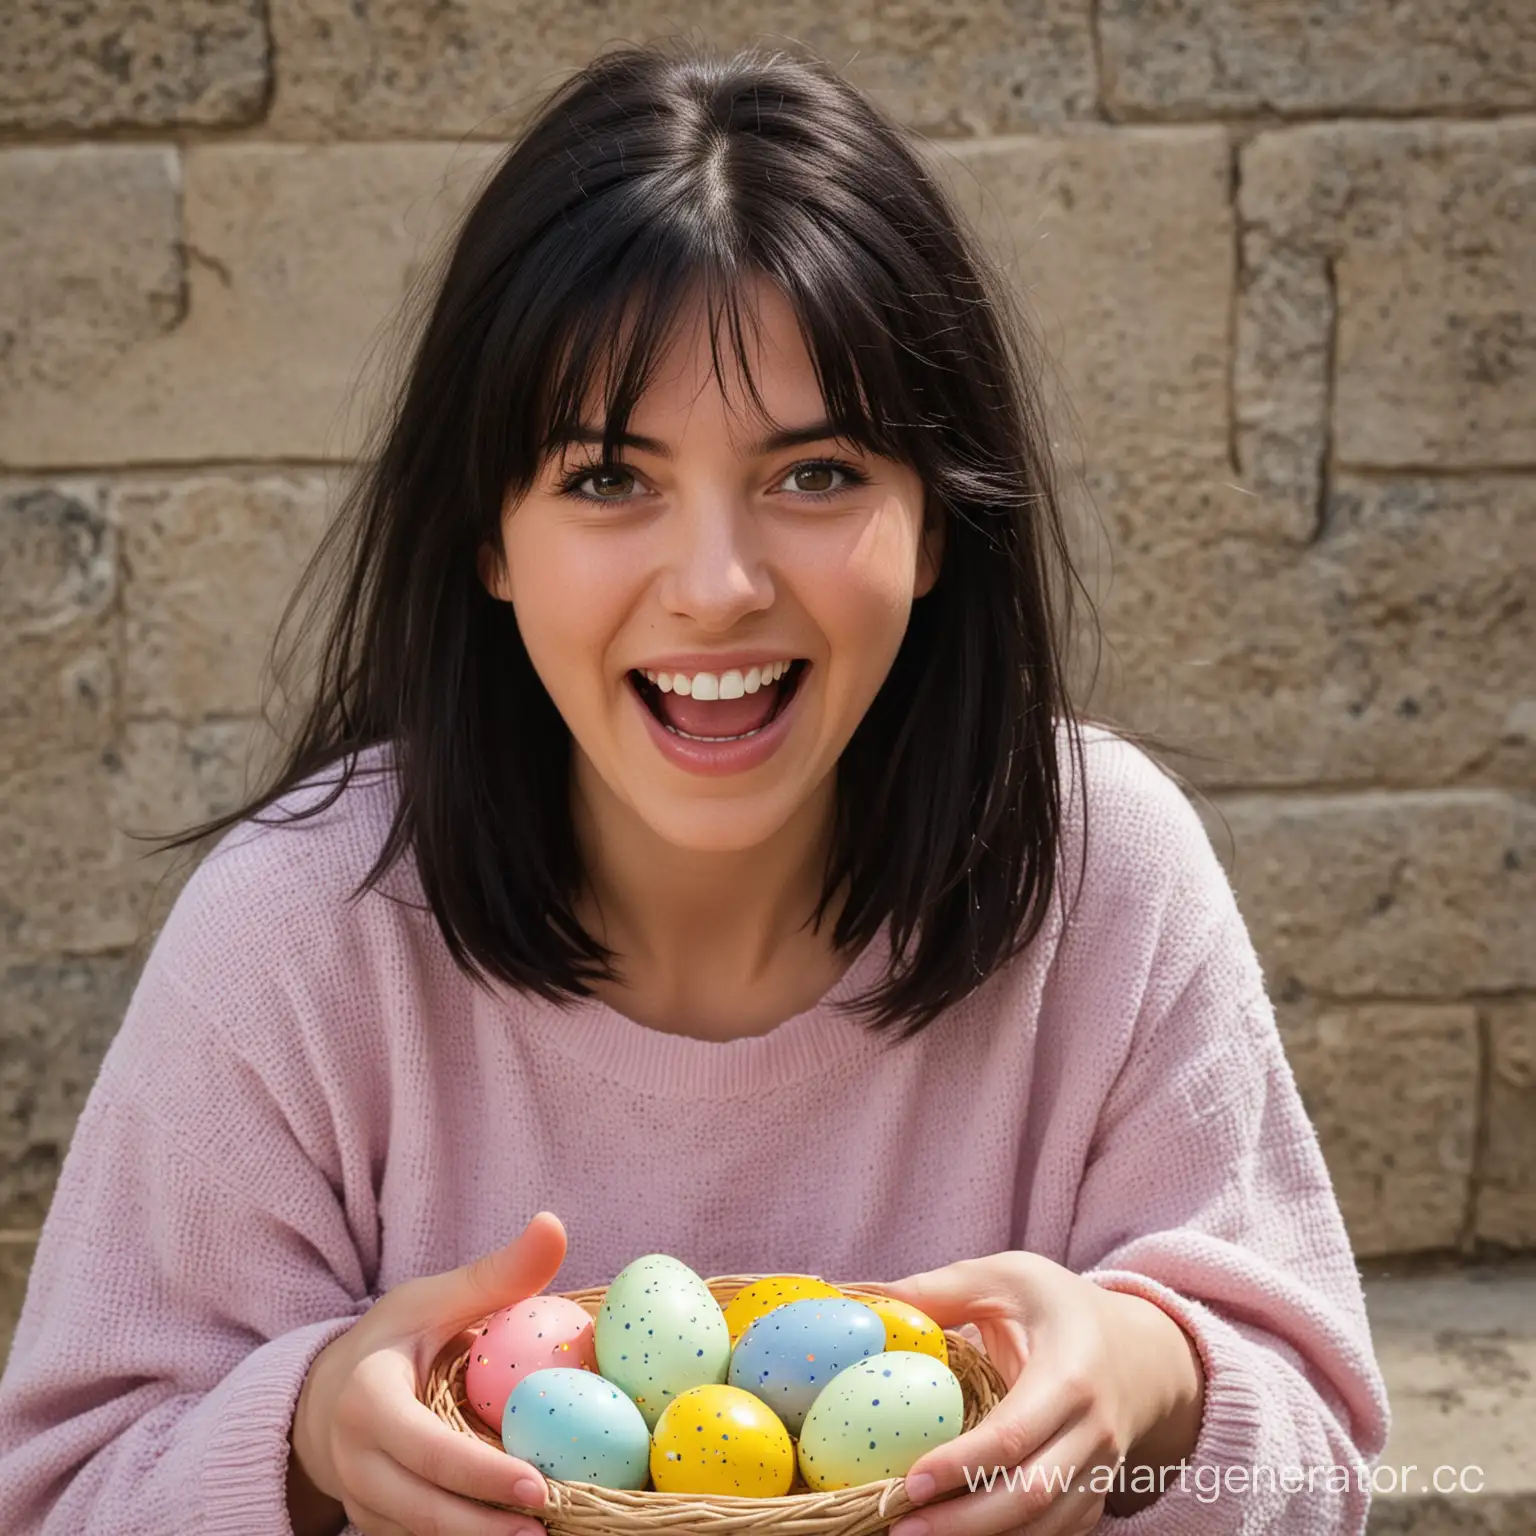 DarkHaired-Girl-Laughing-at-Easter-Egg-1488